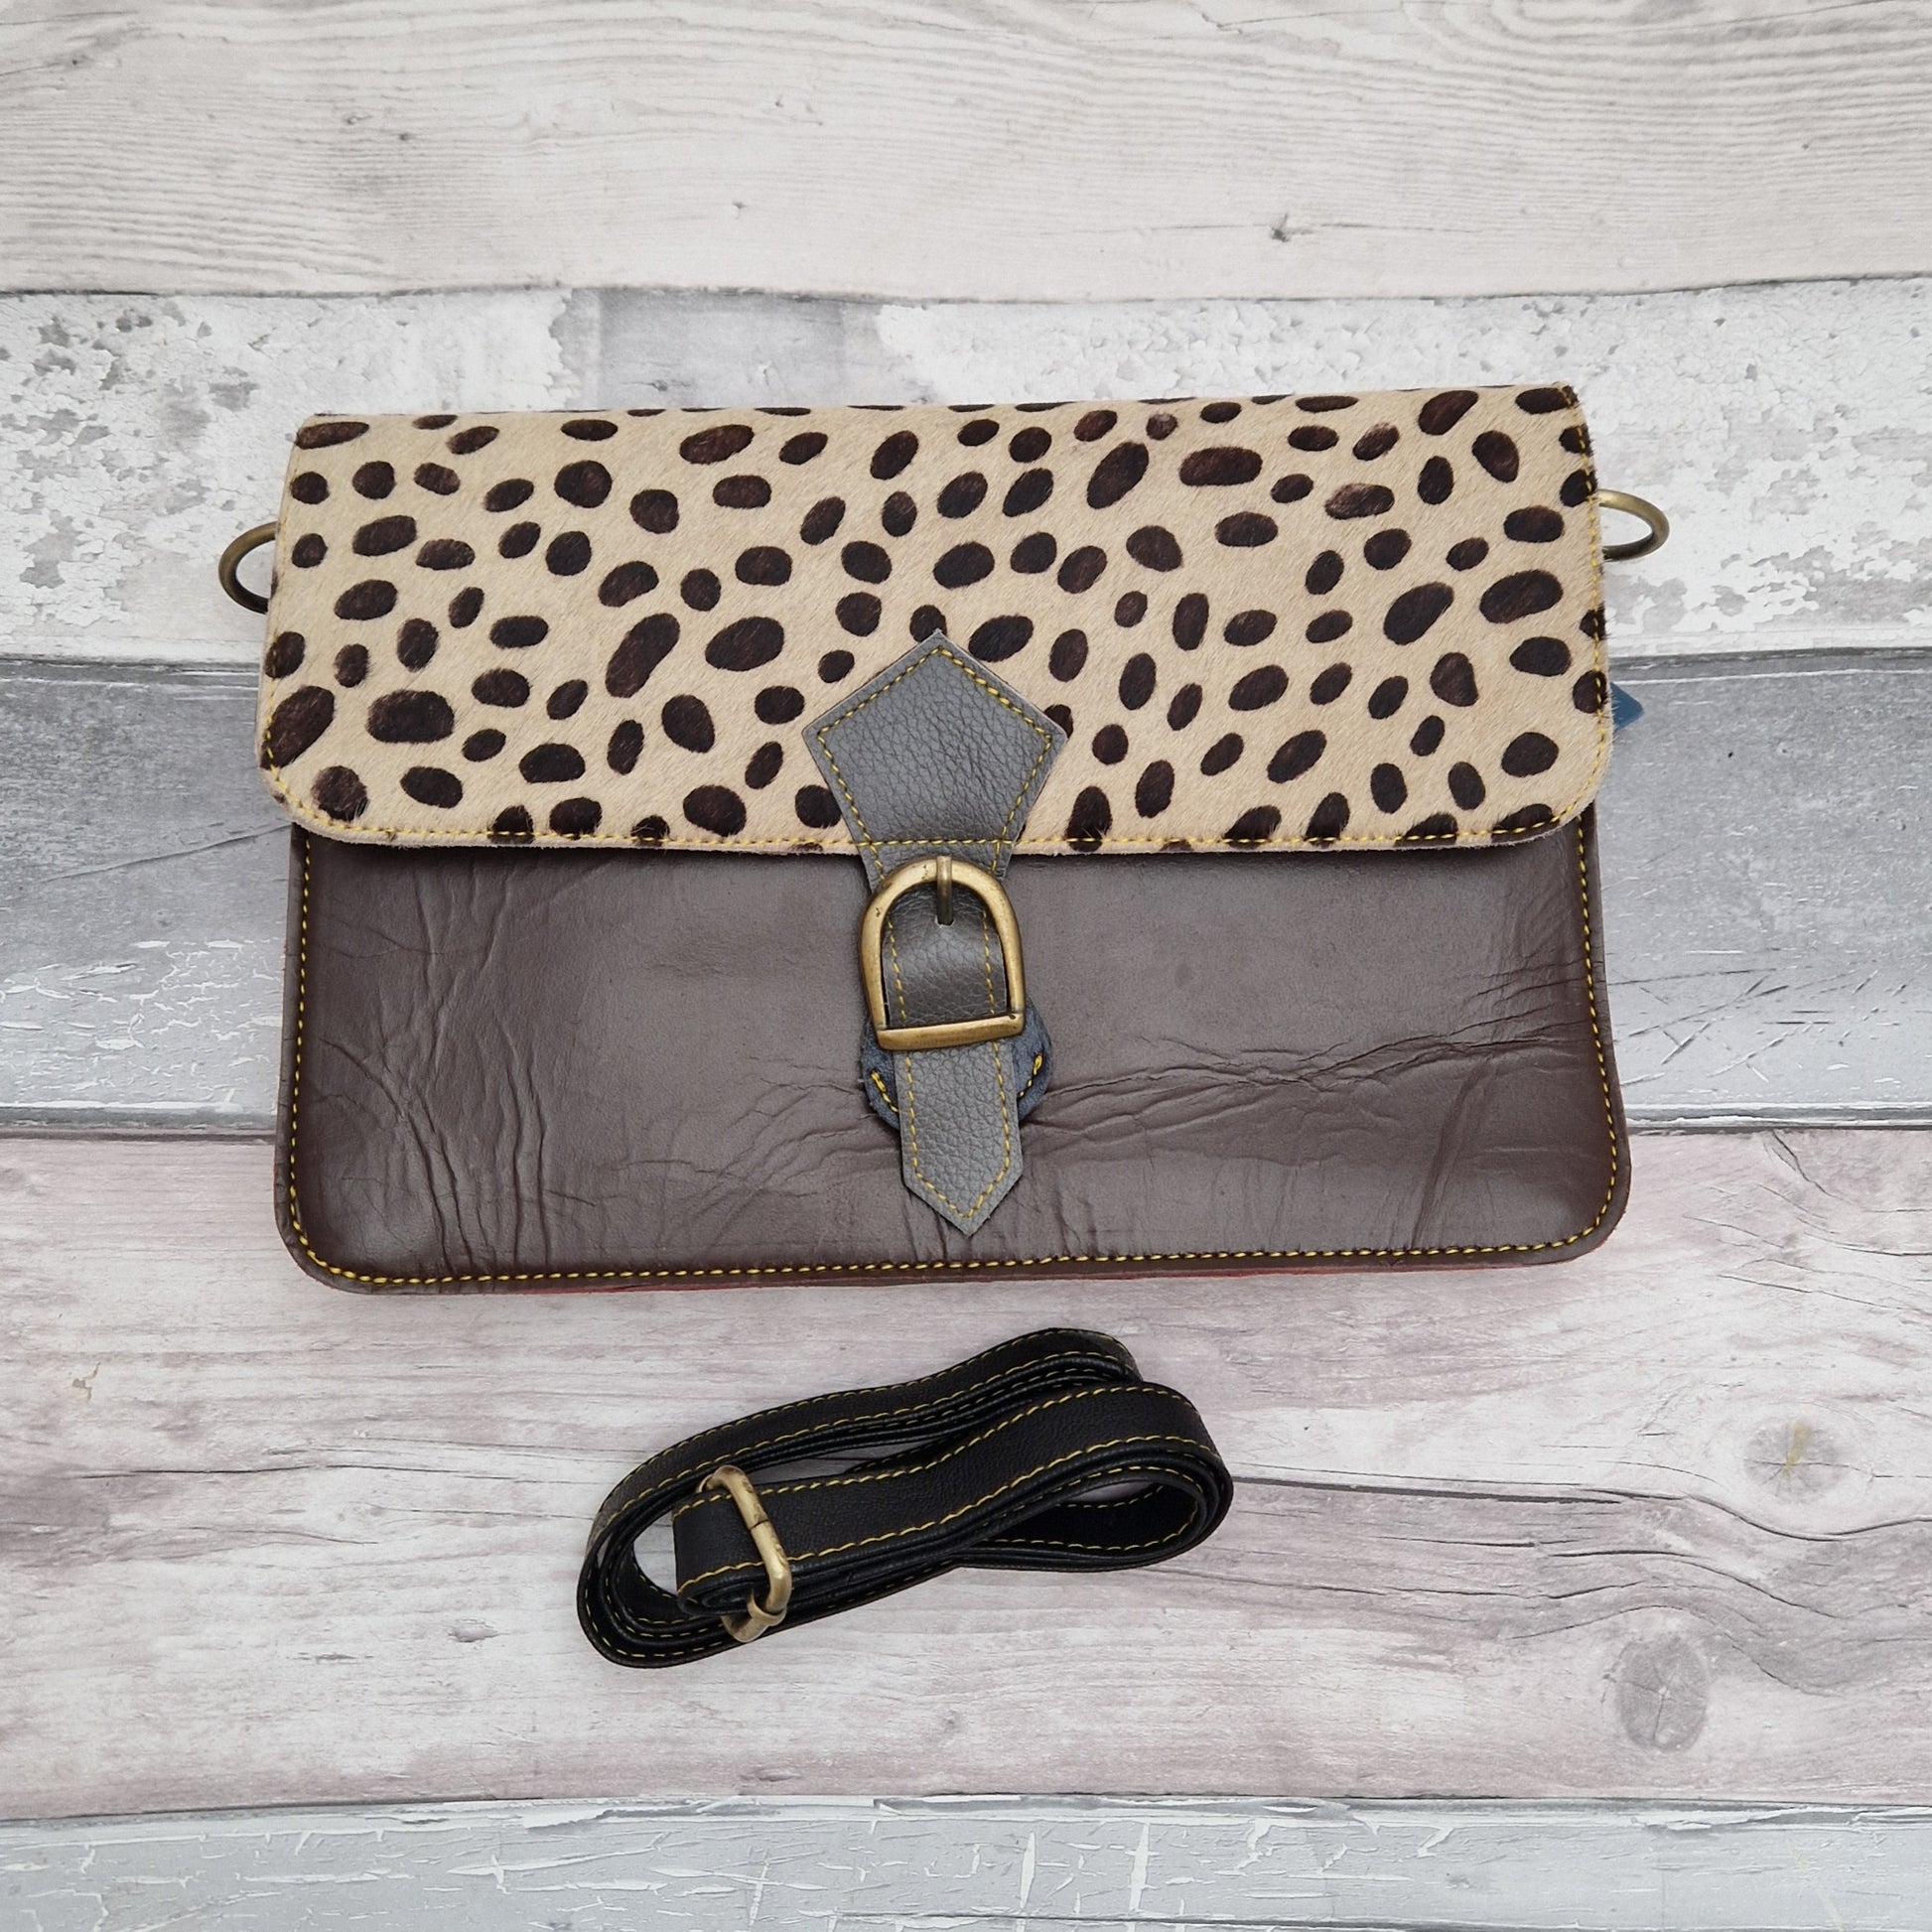 Chocolate coloured leather bag with a textured spotty print panel.